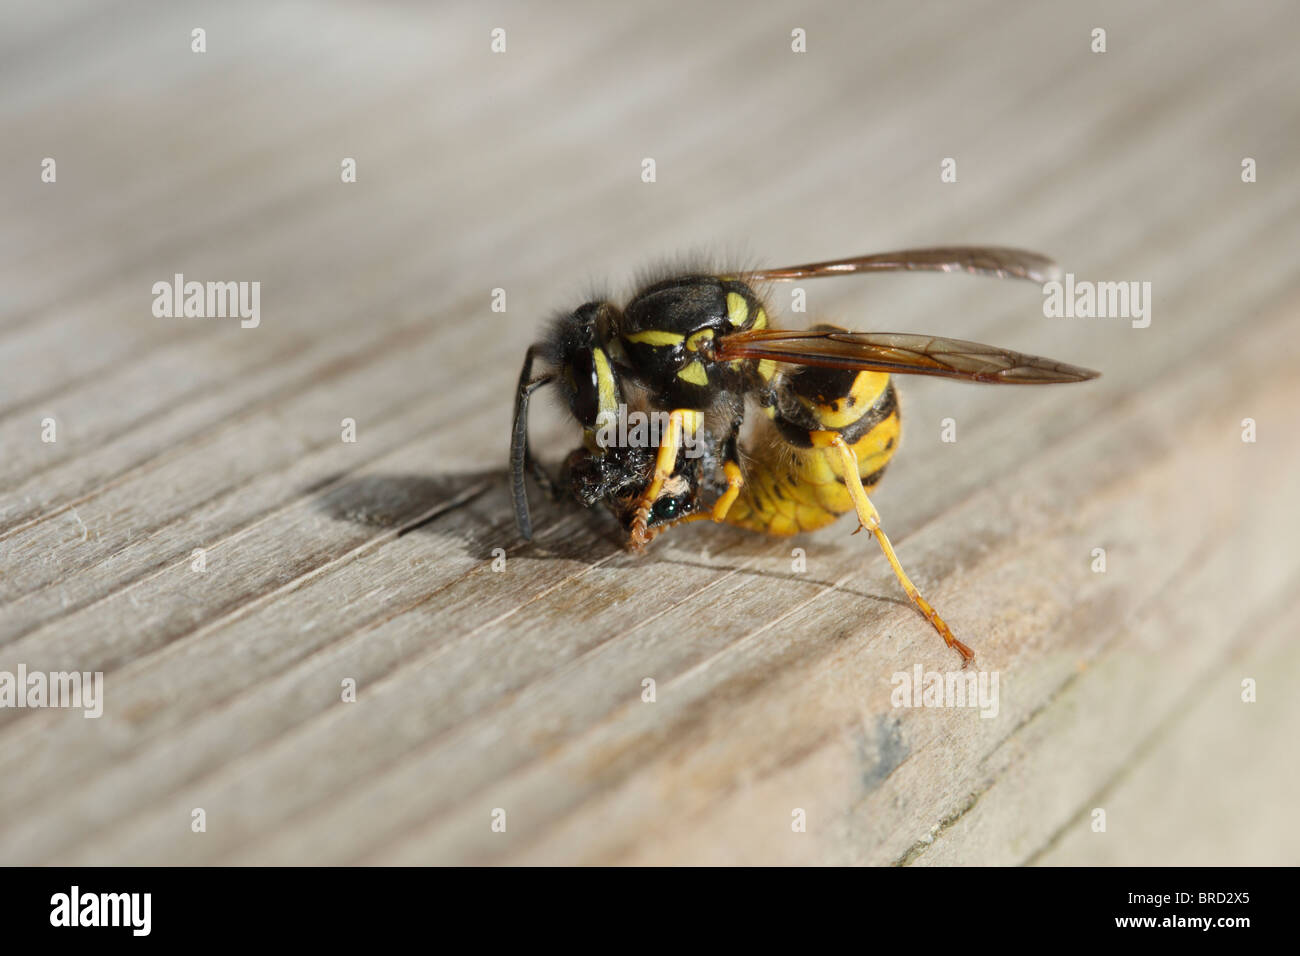 Common Wasp attacking and killing a Fencepost Jumping Spider Stock Photo